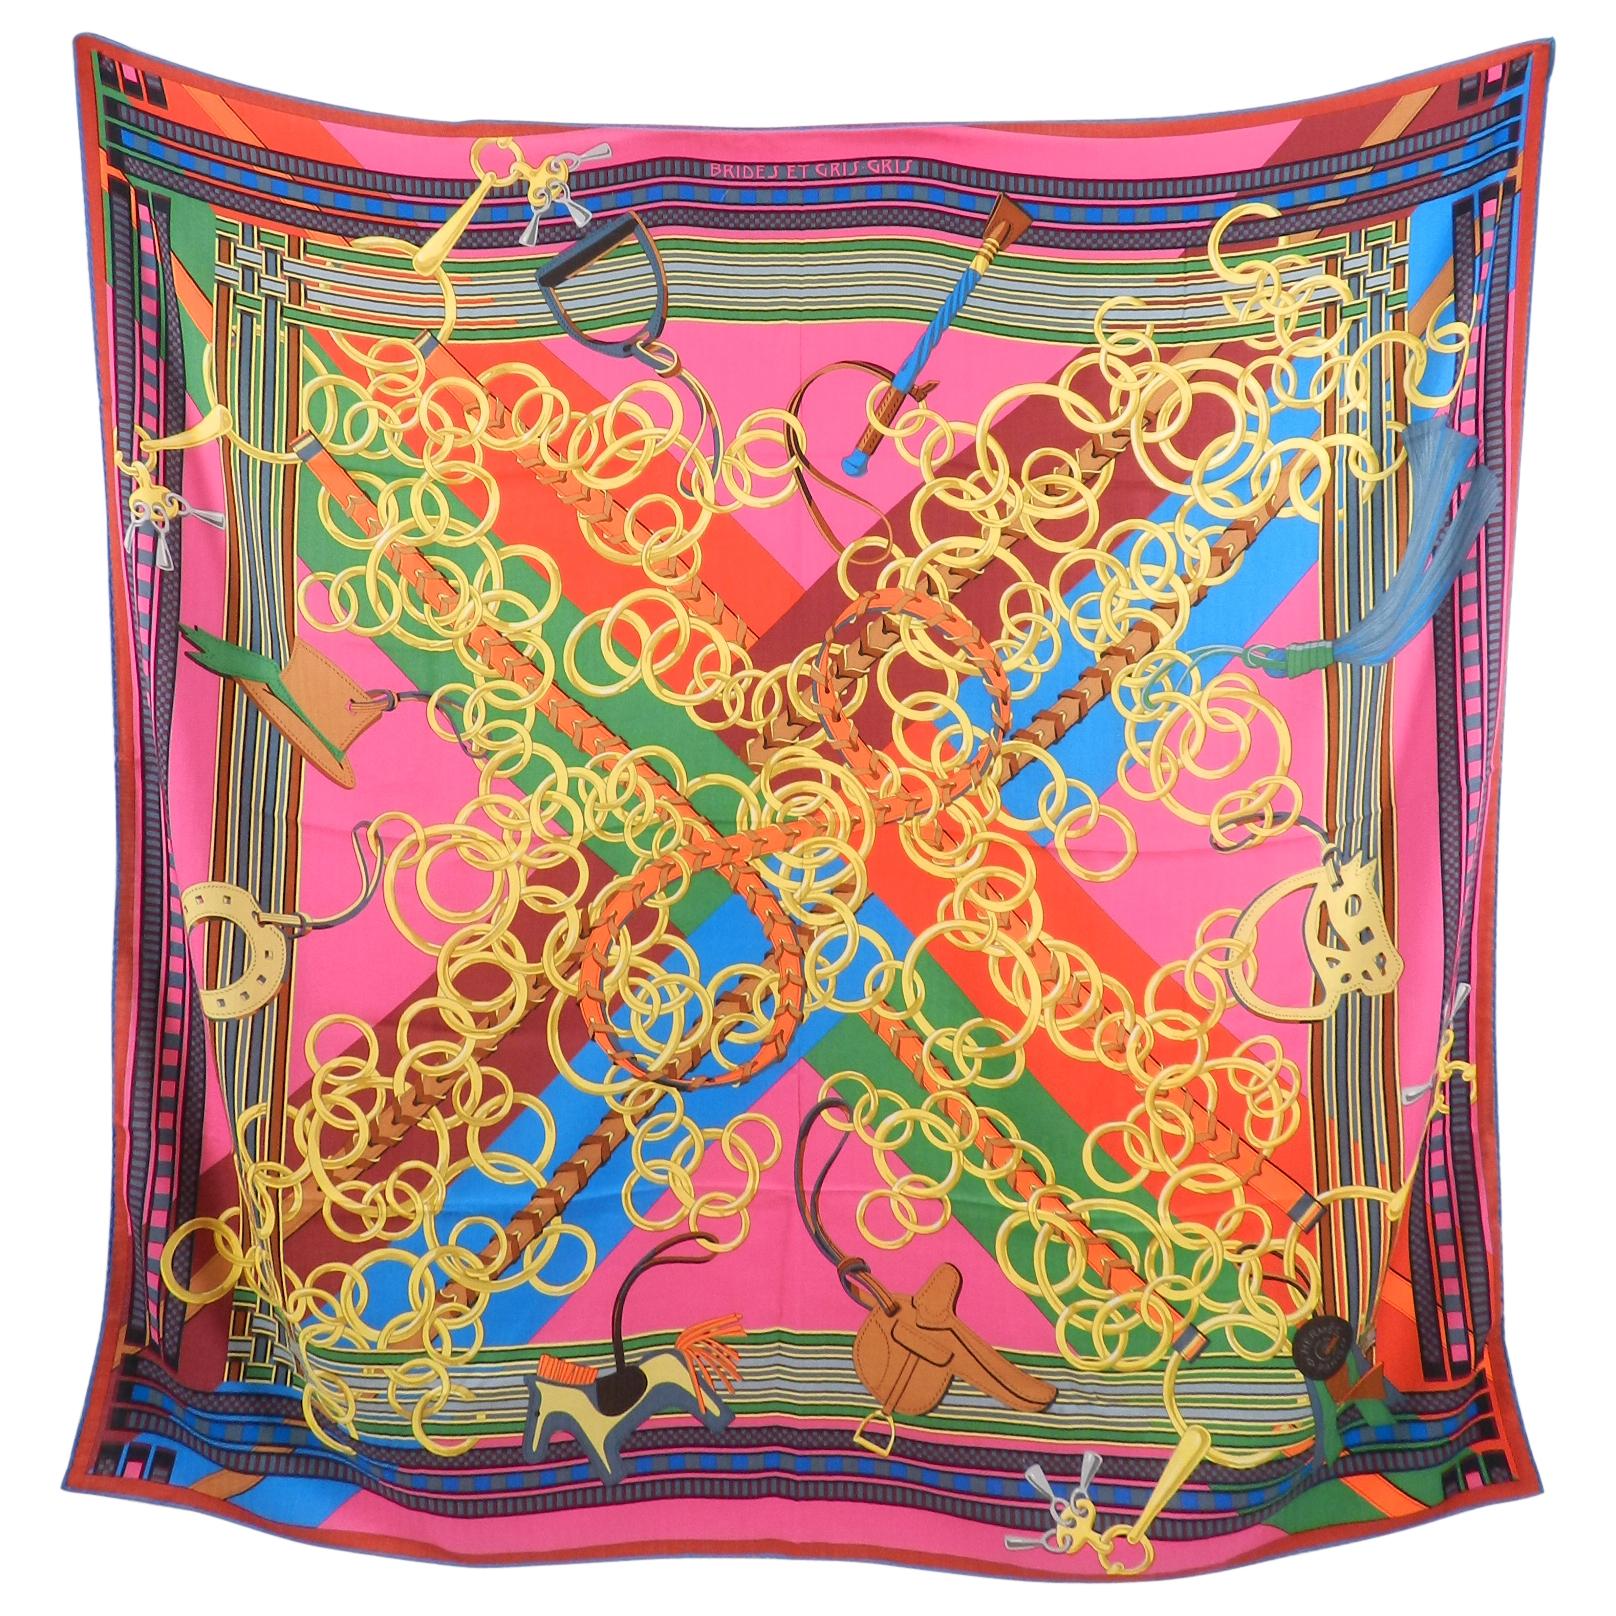 Hermes “Brides et Gris Gris” Cashmere Blend Shawl 140cm.  Vibrant design in fuchsia, red, blue, green, yellow, and orange.  Chain horse bridle design with various Hermes bag charms.  Excellent pre-owned condition with a small pull at centre bottom